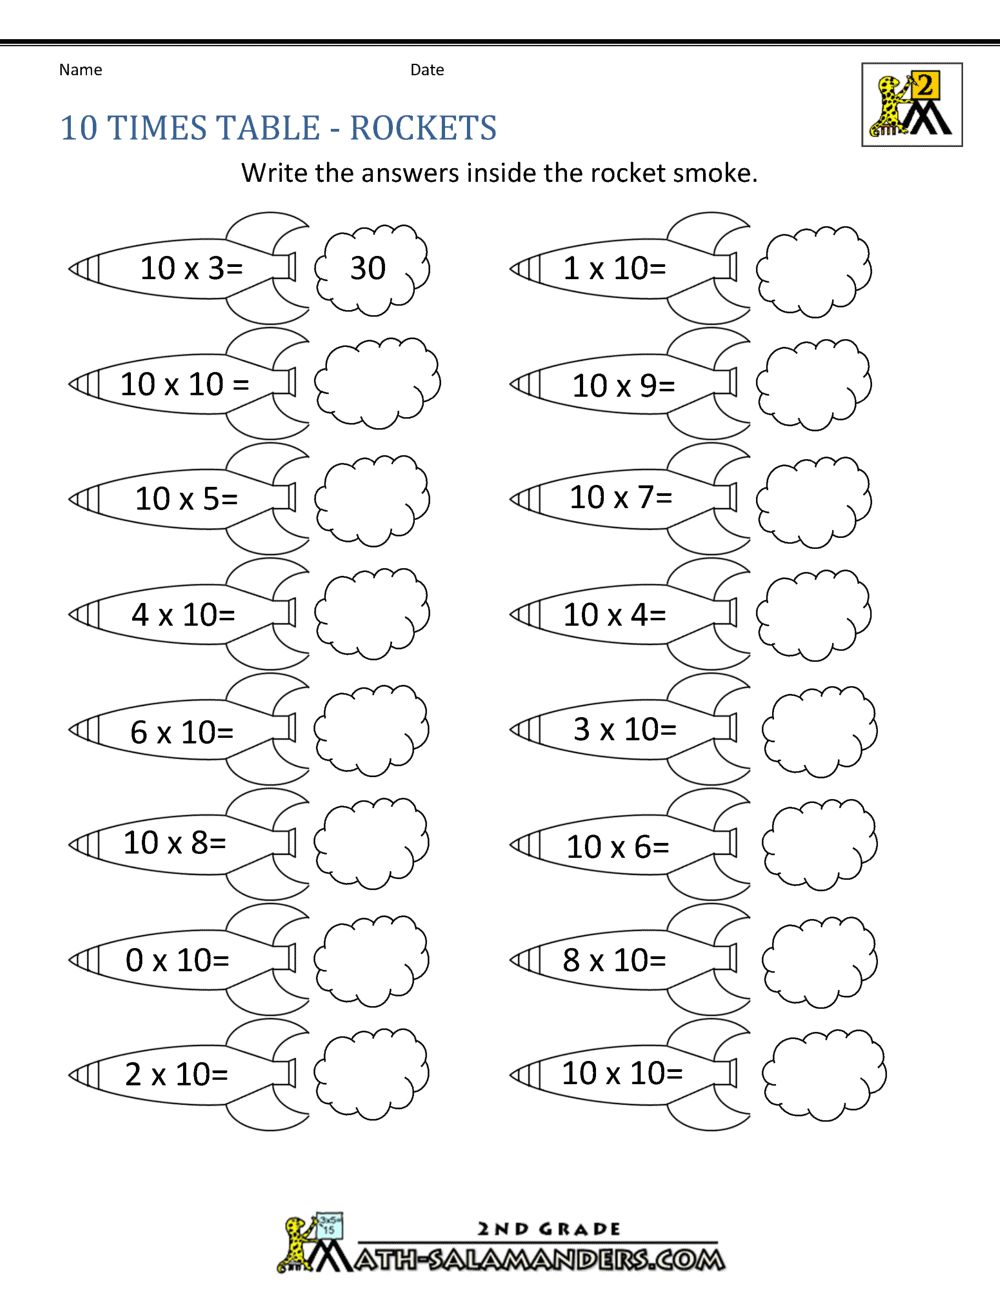 5 INFO 8 TIMES TABLE COLOURING WORKSHEET DOWNLOAD PRINTABLE PDF ZIP 